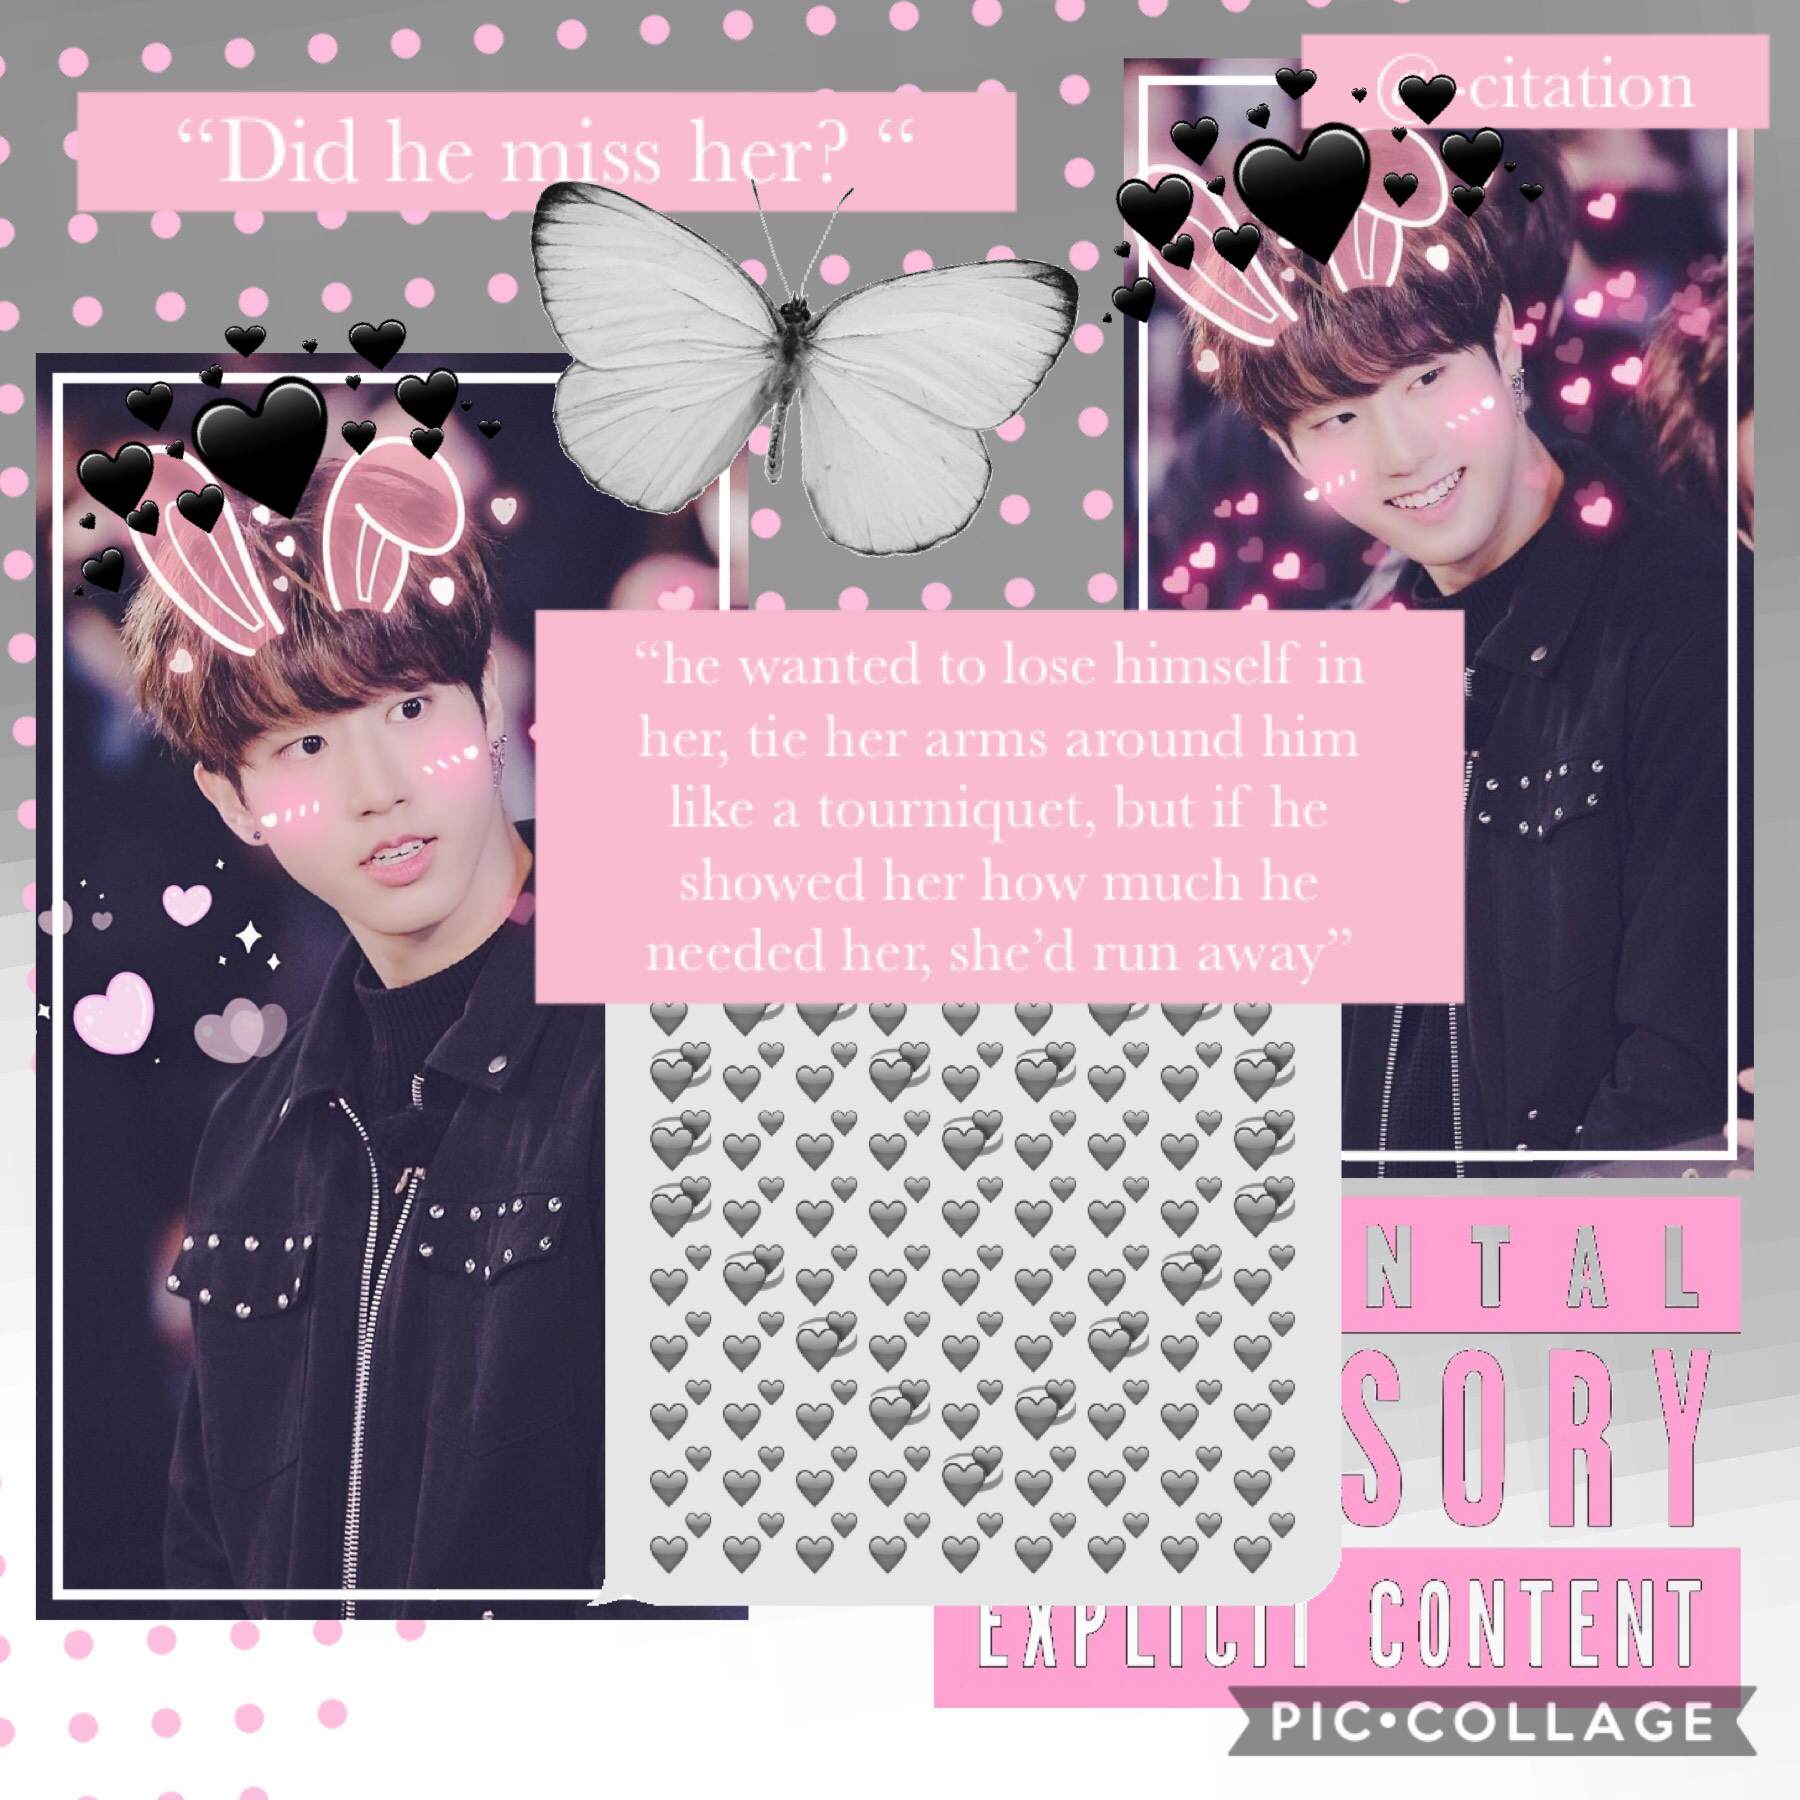 tapppp baes 😘
Edit for @jaEwALkiNg (go follow for amazing edits and support) 
TYSM for your support (omg I’ve been getting 30ish likes again yay now i just have to wait till I get 50s!!) 